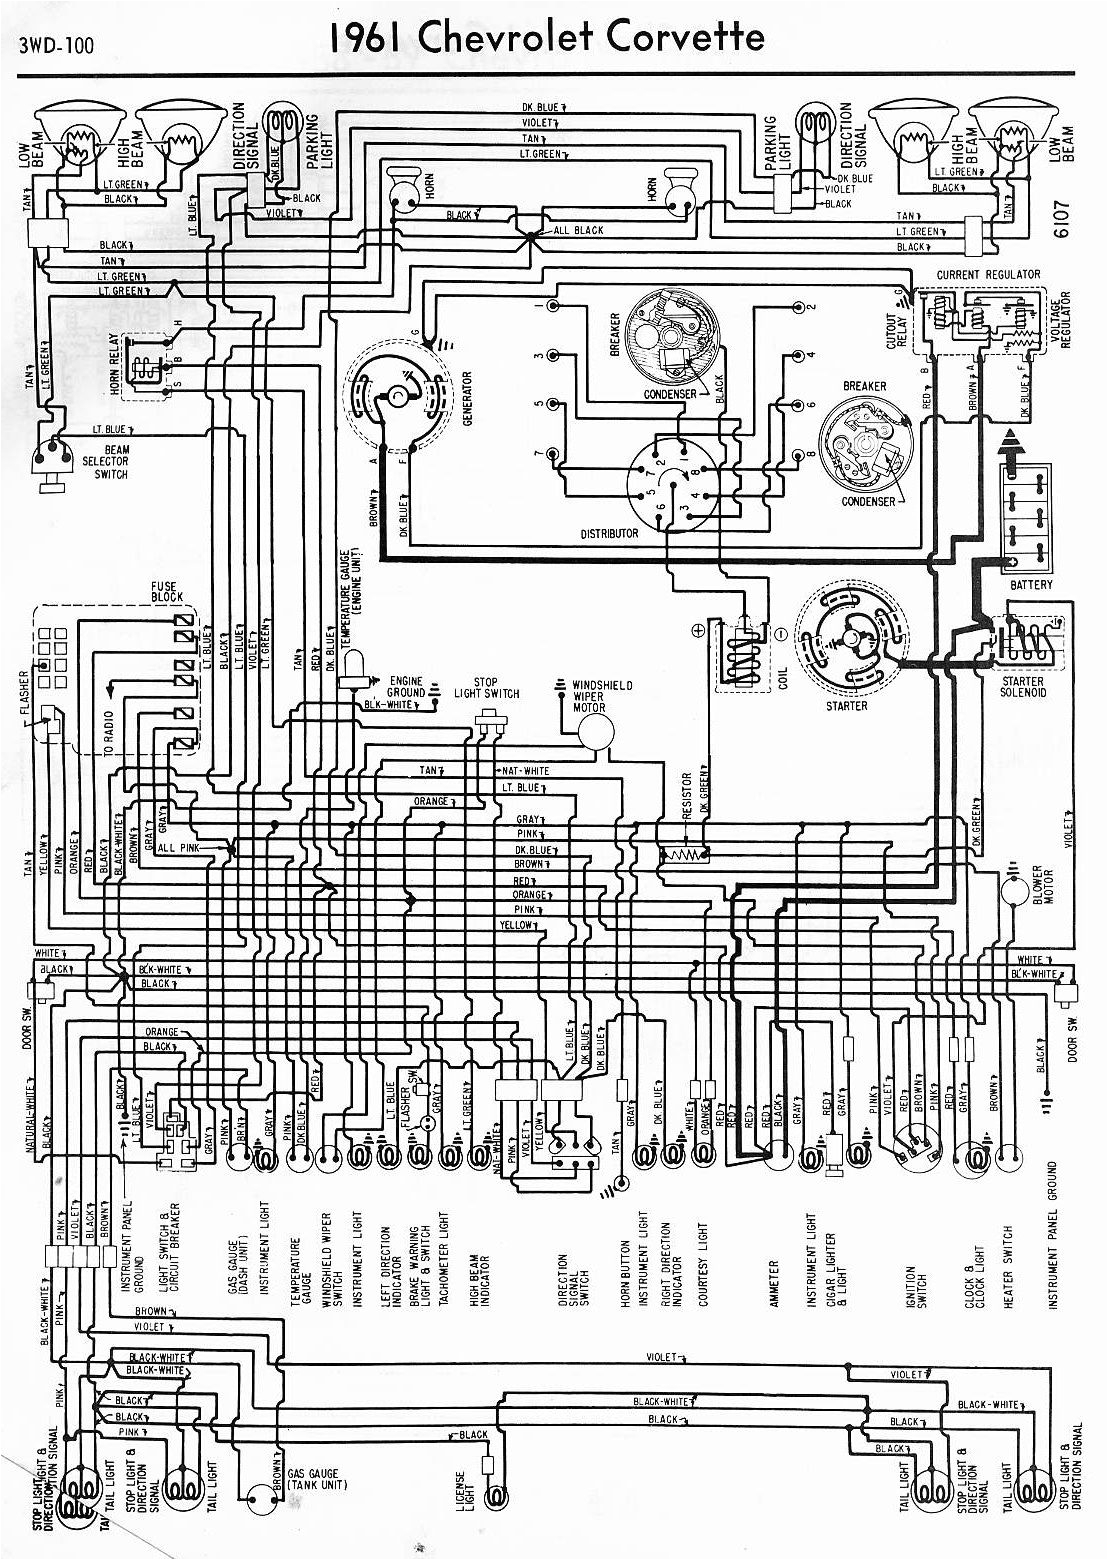 wiring diagram for 1979 chevy corvette wiring diagrams favorites 1979 corvette wiring diagram 1979 corvette fuse diagram